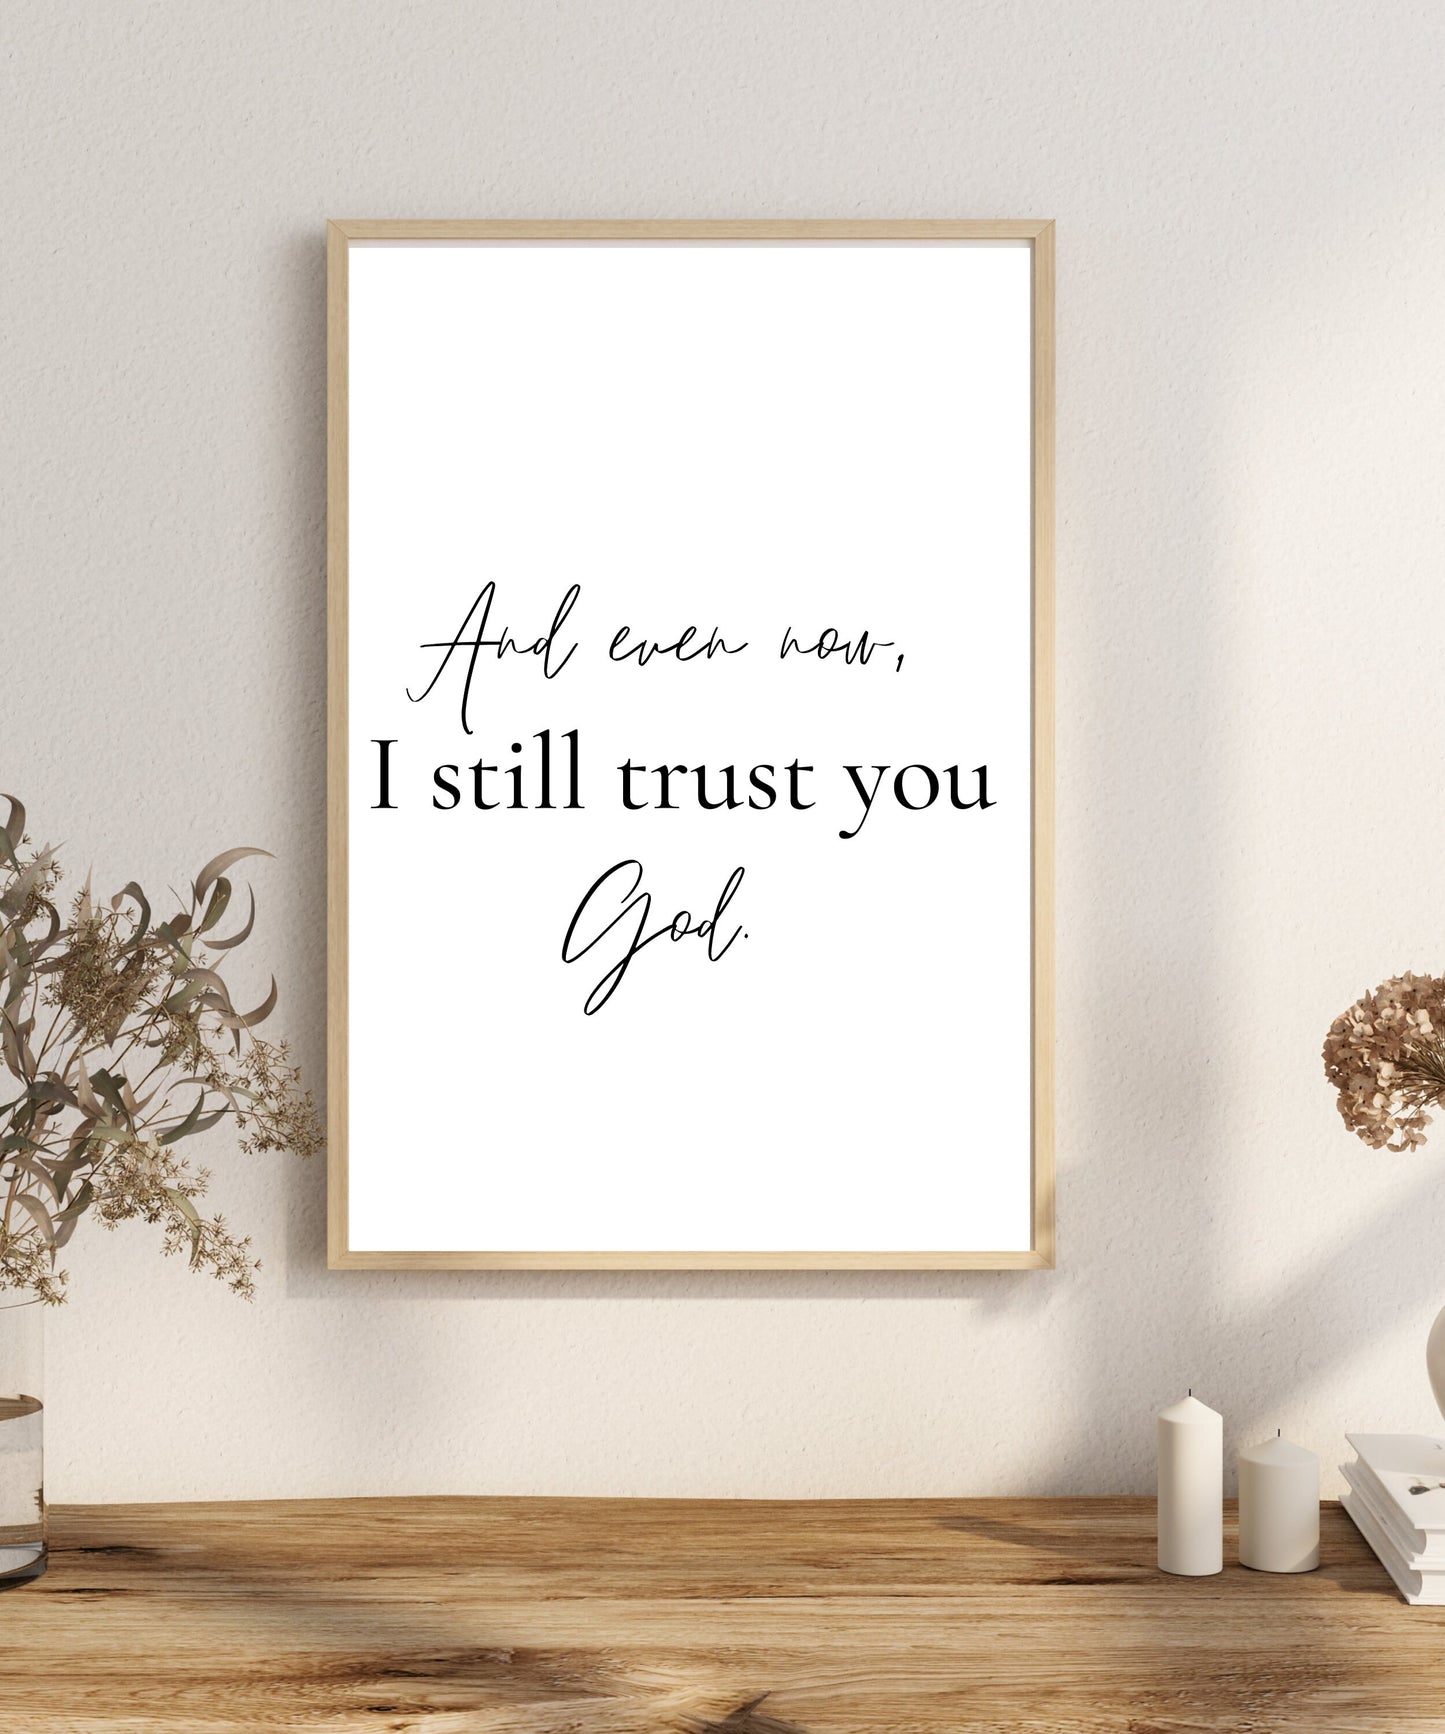 I trust you God, Christian printable wall art, And Even Now, living room wall art, dearsoulprints, Christian decor, Christian gifts